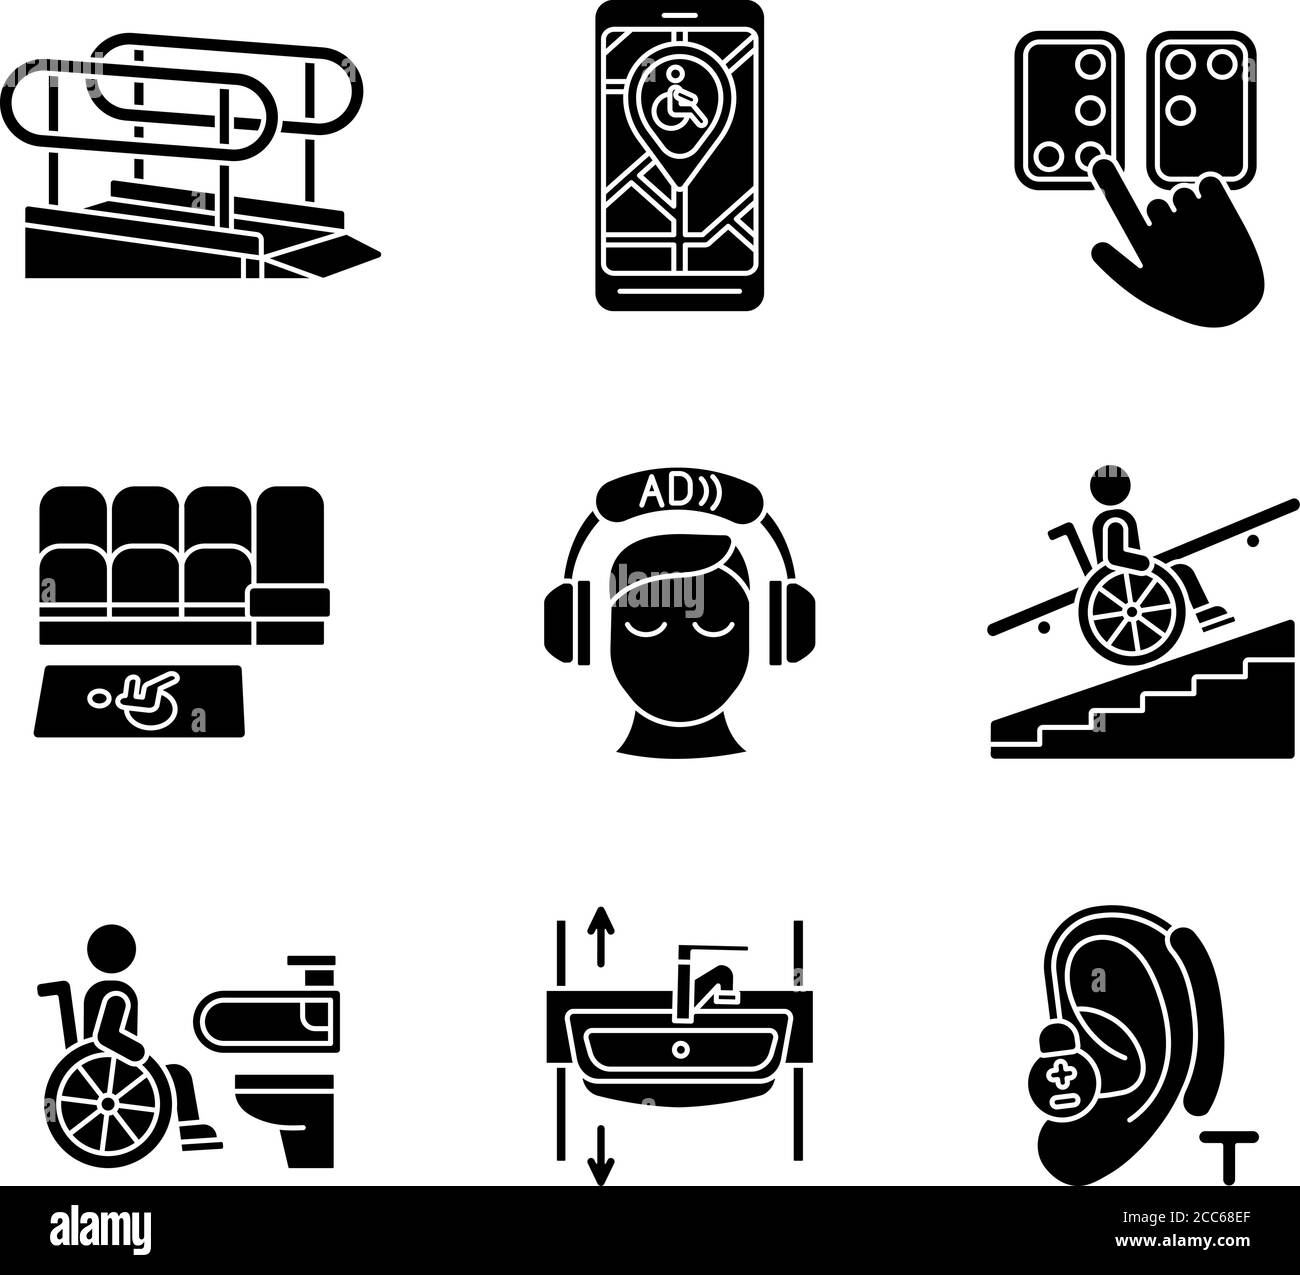 Facilities for people with disabilities black glyph icons set on white space Stock Vector